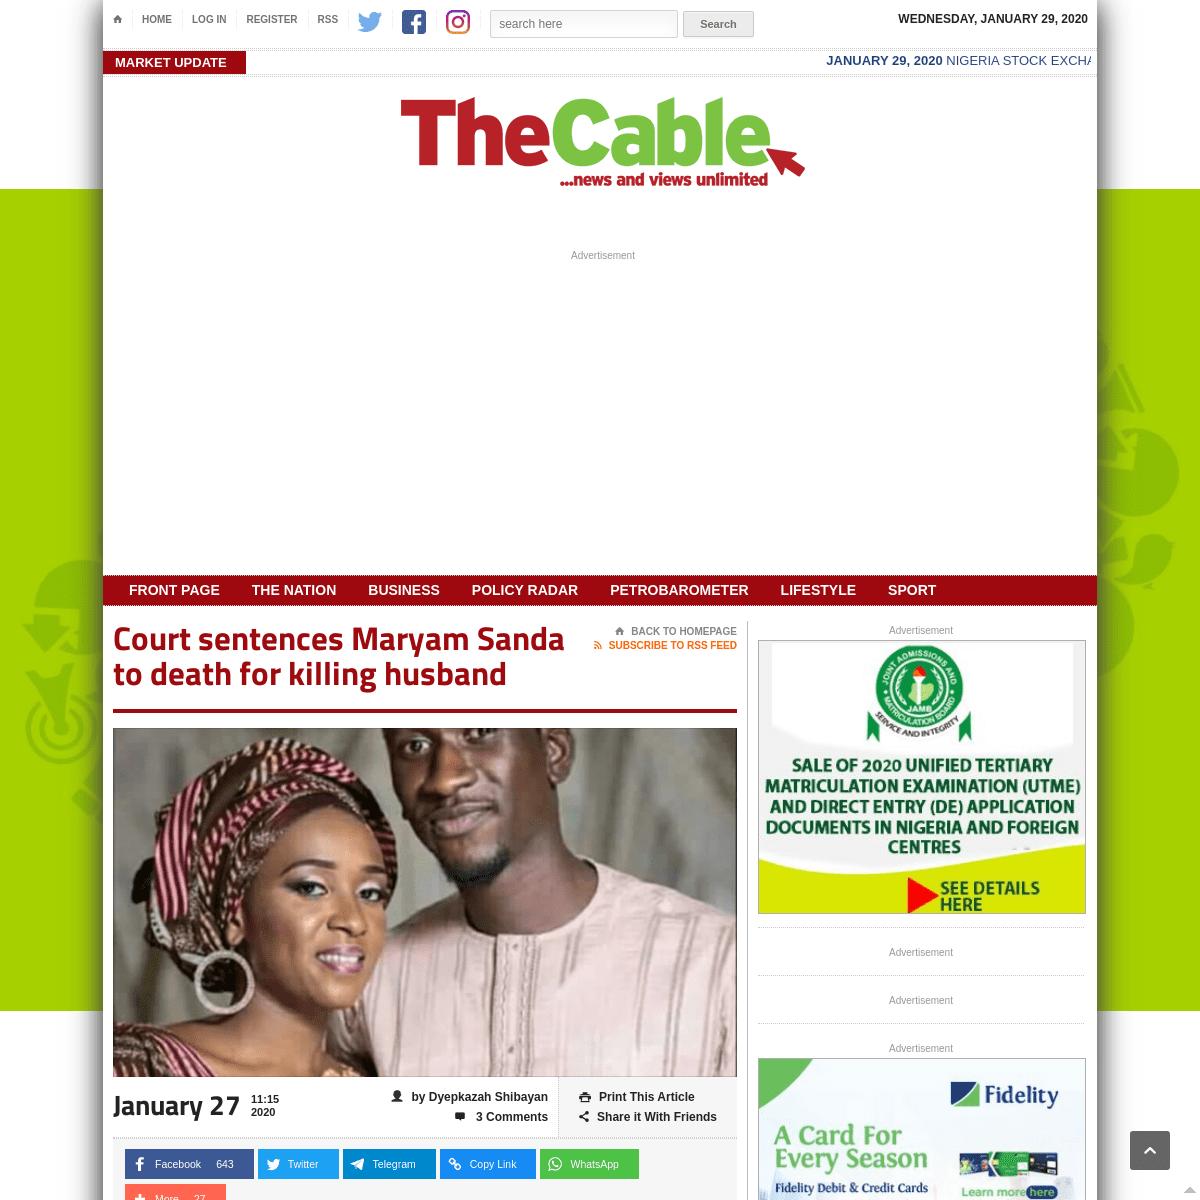 A complete backup of www.thecable.ng/breaking-court-finds-maryam-sanda-guilty-of-killing-husband